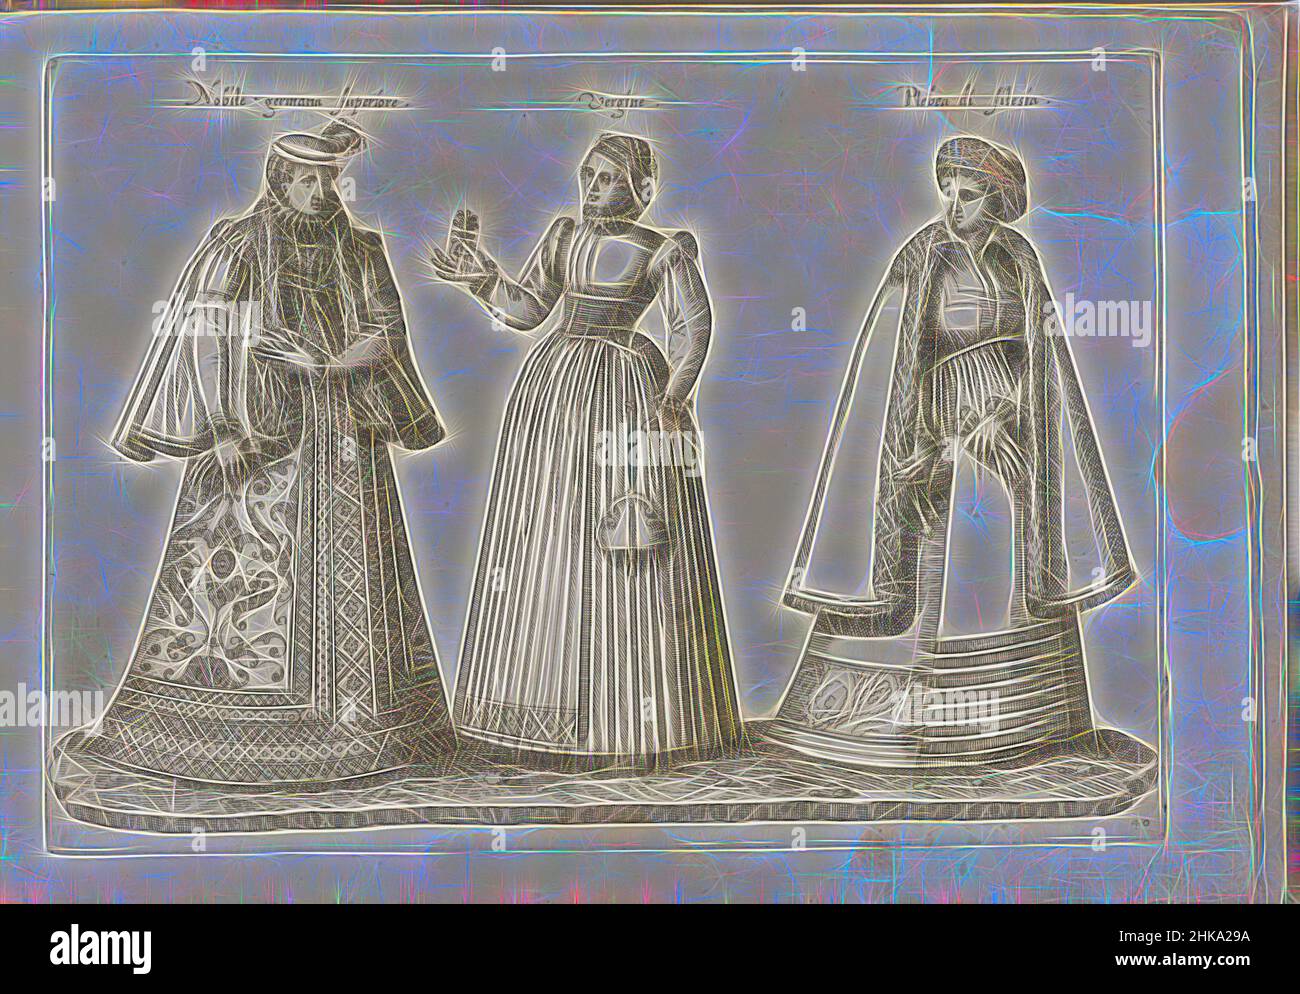 Inspired by Three women dressed according to the German fashion of ca. 1580, Nobile germana superiore, Vergine, Plebea di Silesia, Print from album 'Dei veri ritratti degl'habiti di tvtte le parti del mondo intagliati in rame per opra di Bartolomeo Grassi', 1585., publisher: Bartolomeo Grassi, in or, Reimagined by Artotop. Classic art reinvented with a modern twist. Design of warm cheerful glowing of brightness and light ray radiance. Photography inspired by surrealism and futurism, embracing dynamic energy of modern technology, movement, speed and revolutionize culture Stock Photo